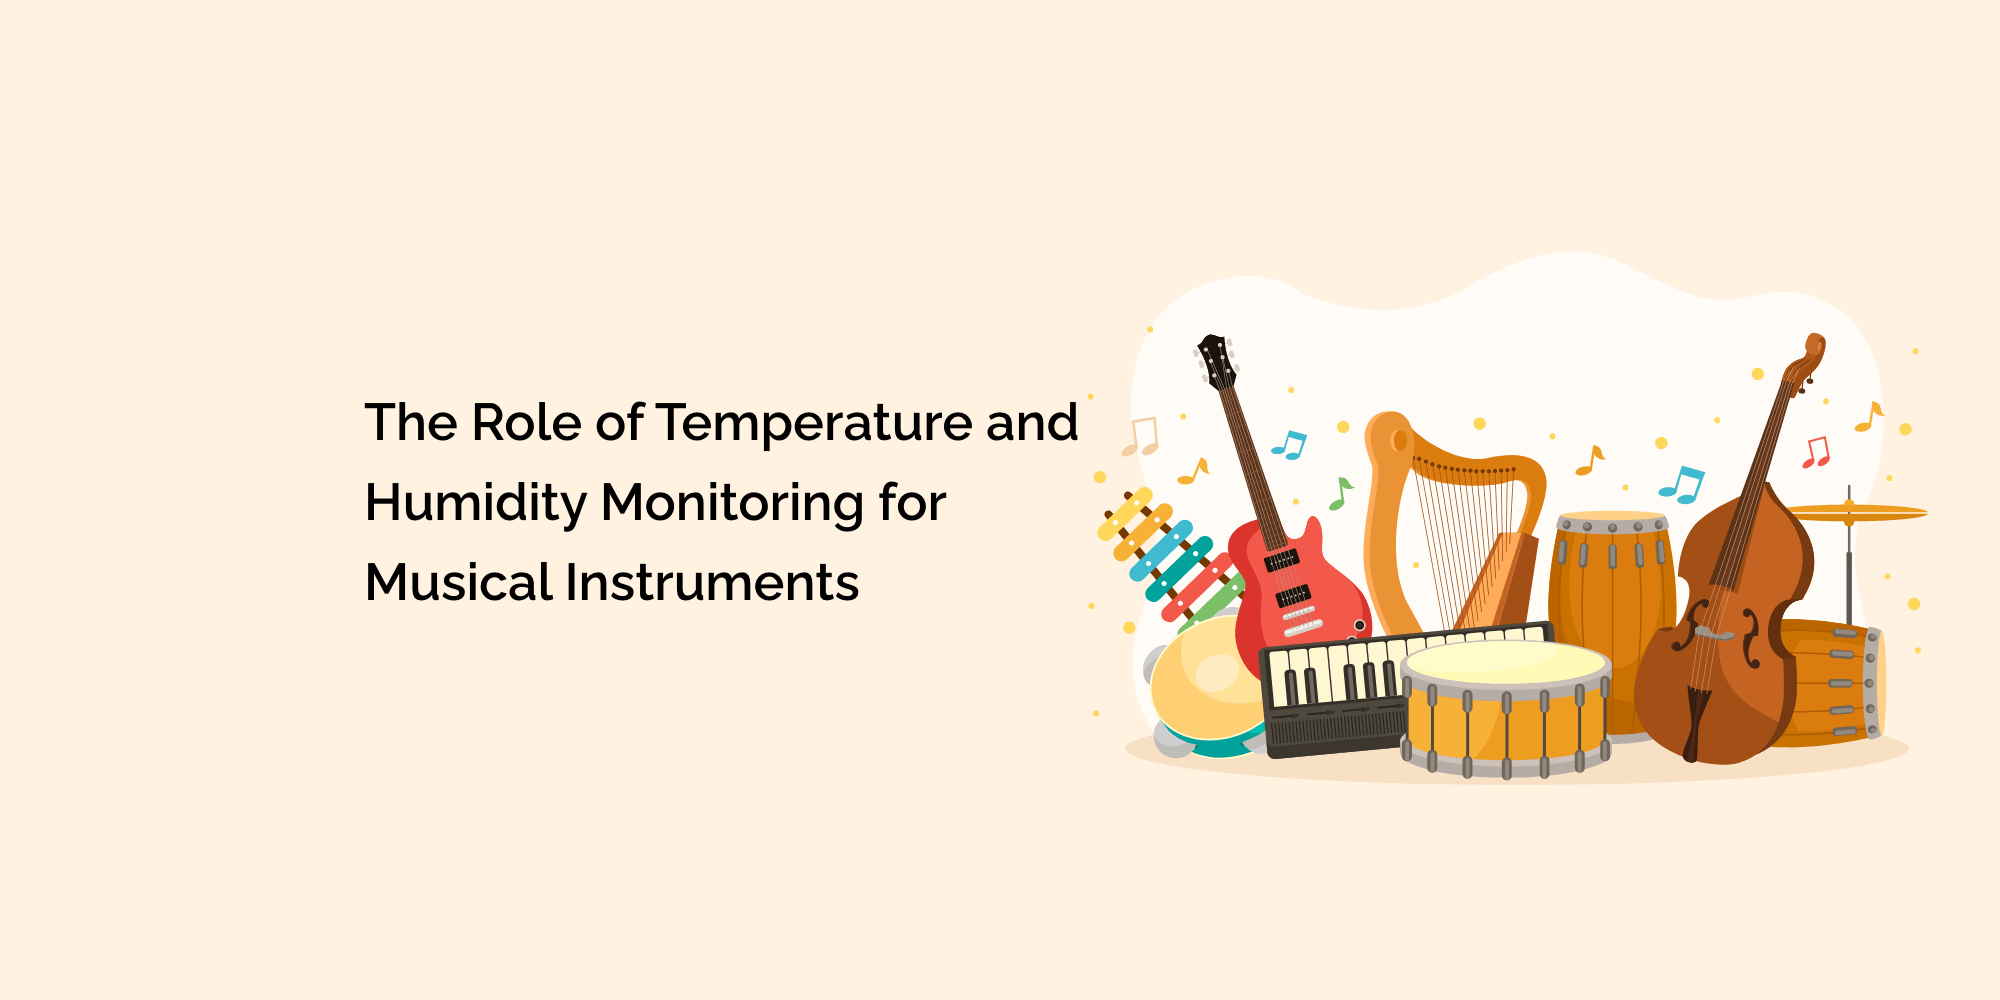 The Role of Temperature and Humidity Monitoring for Musical Instruments